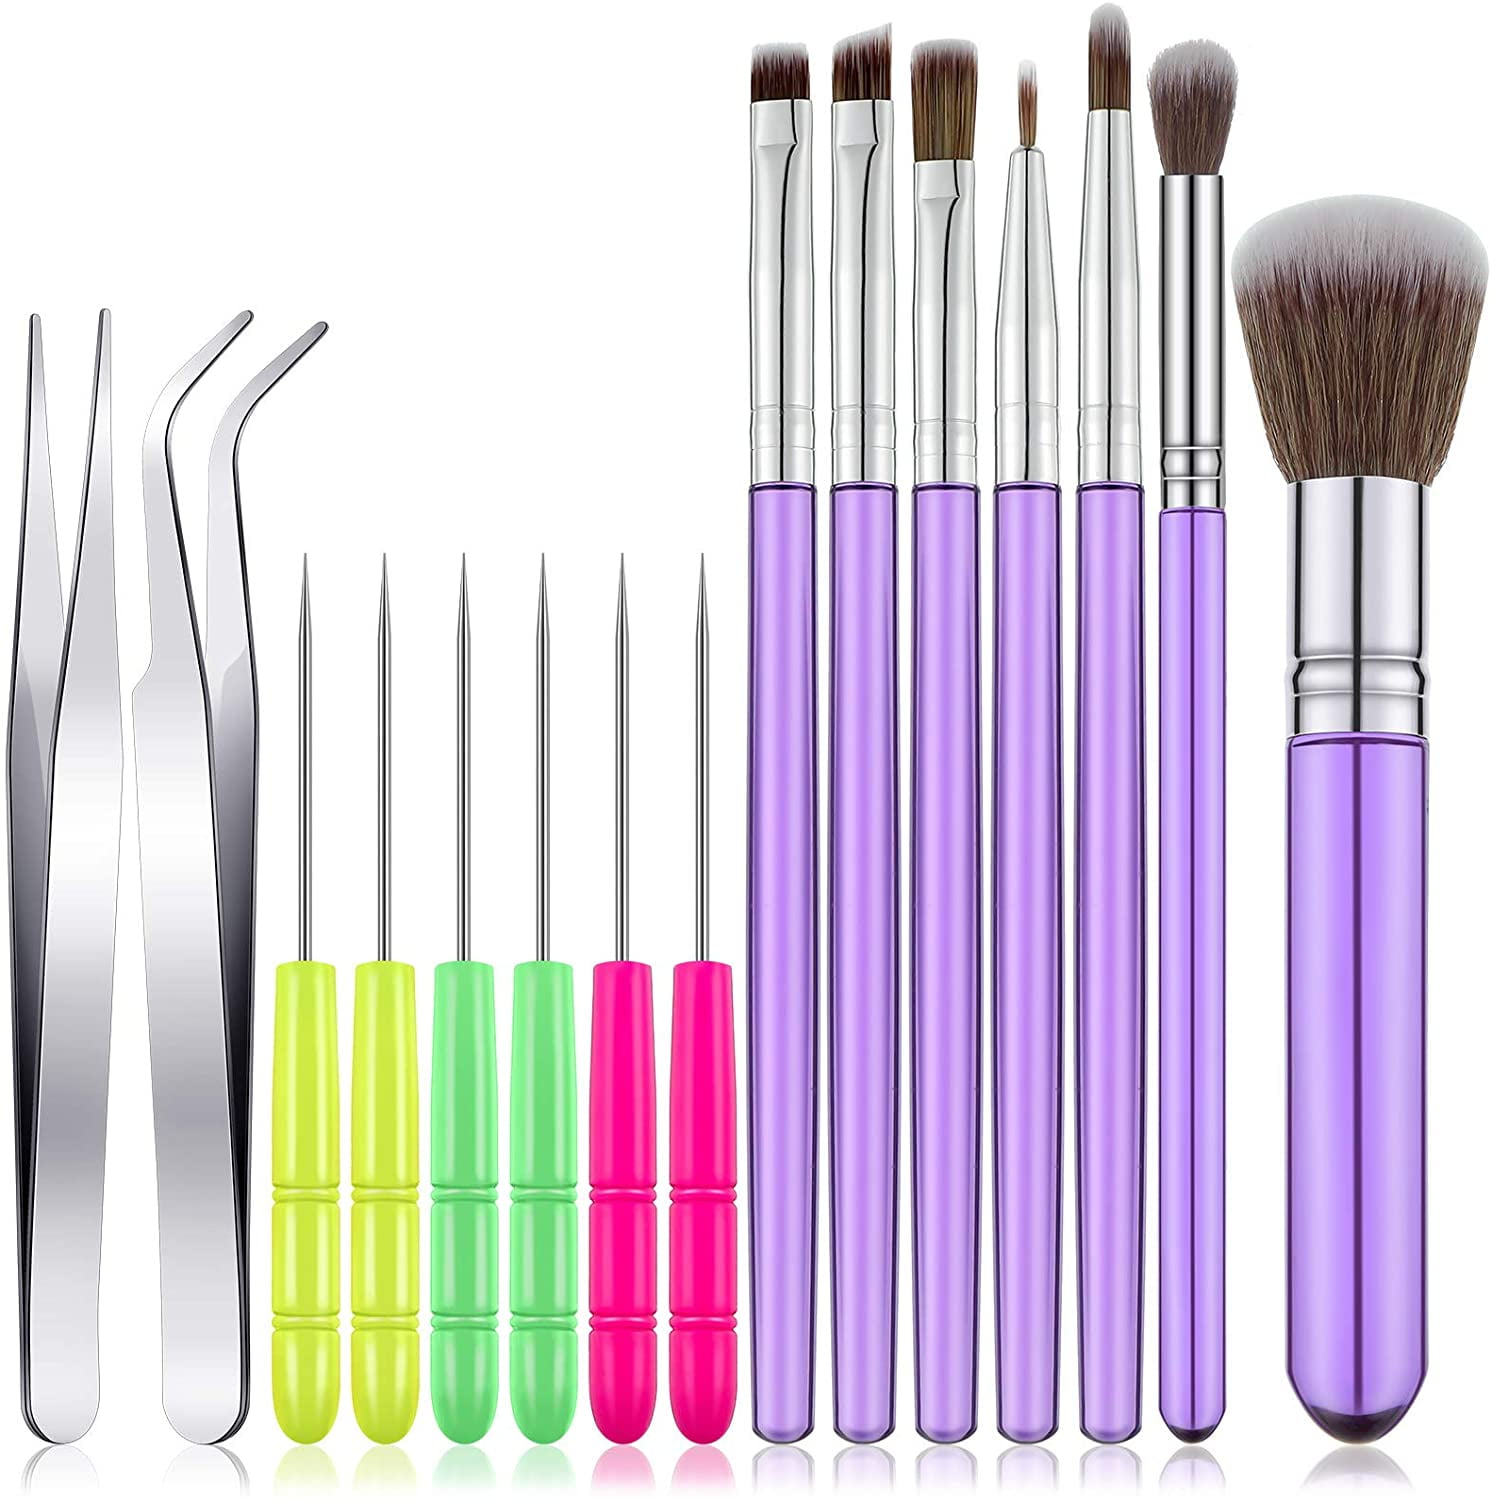 15 Pieces Cake Decorating Tool Set Cookie Decoration Brushes Cookie Scriber Need 